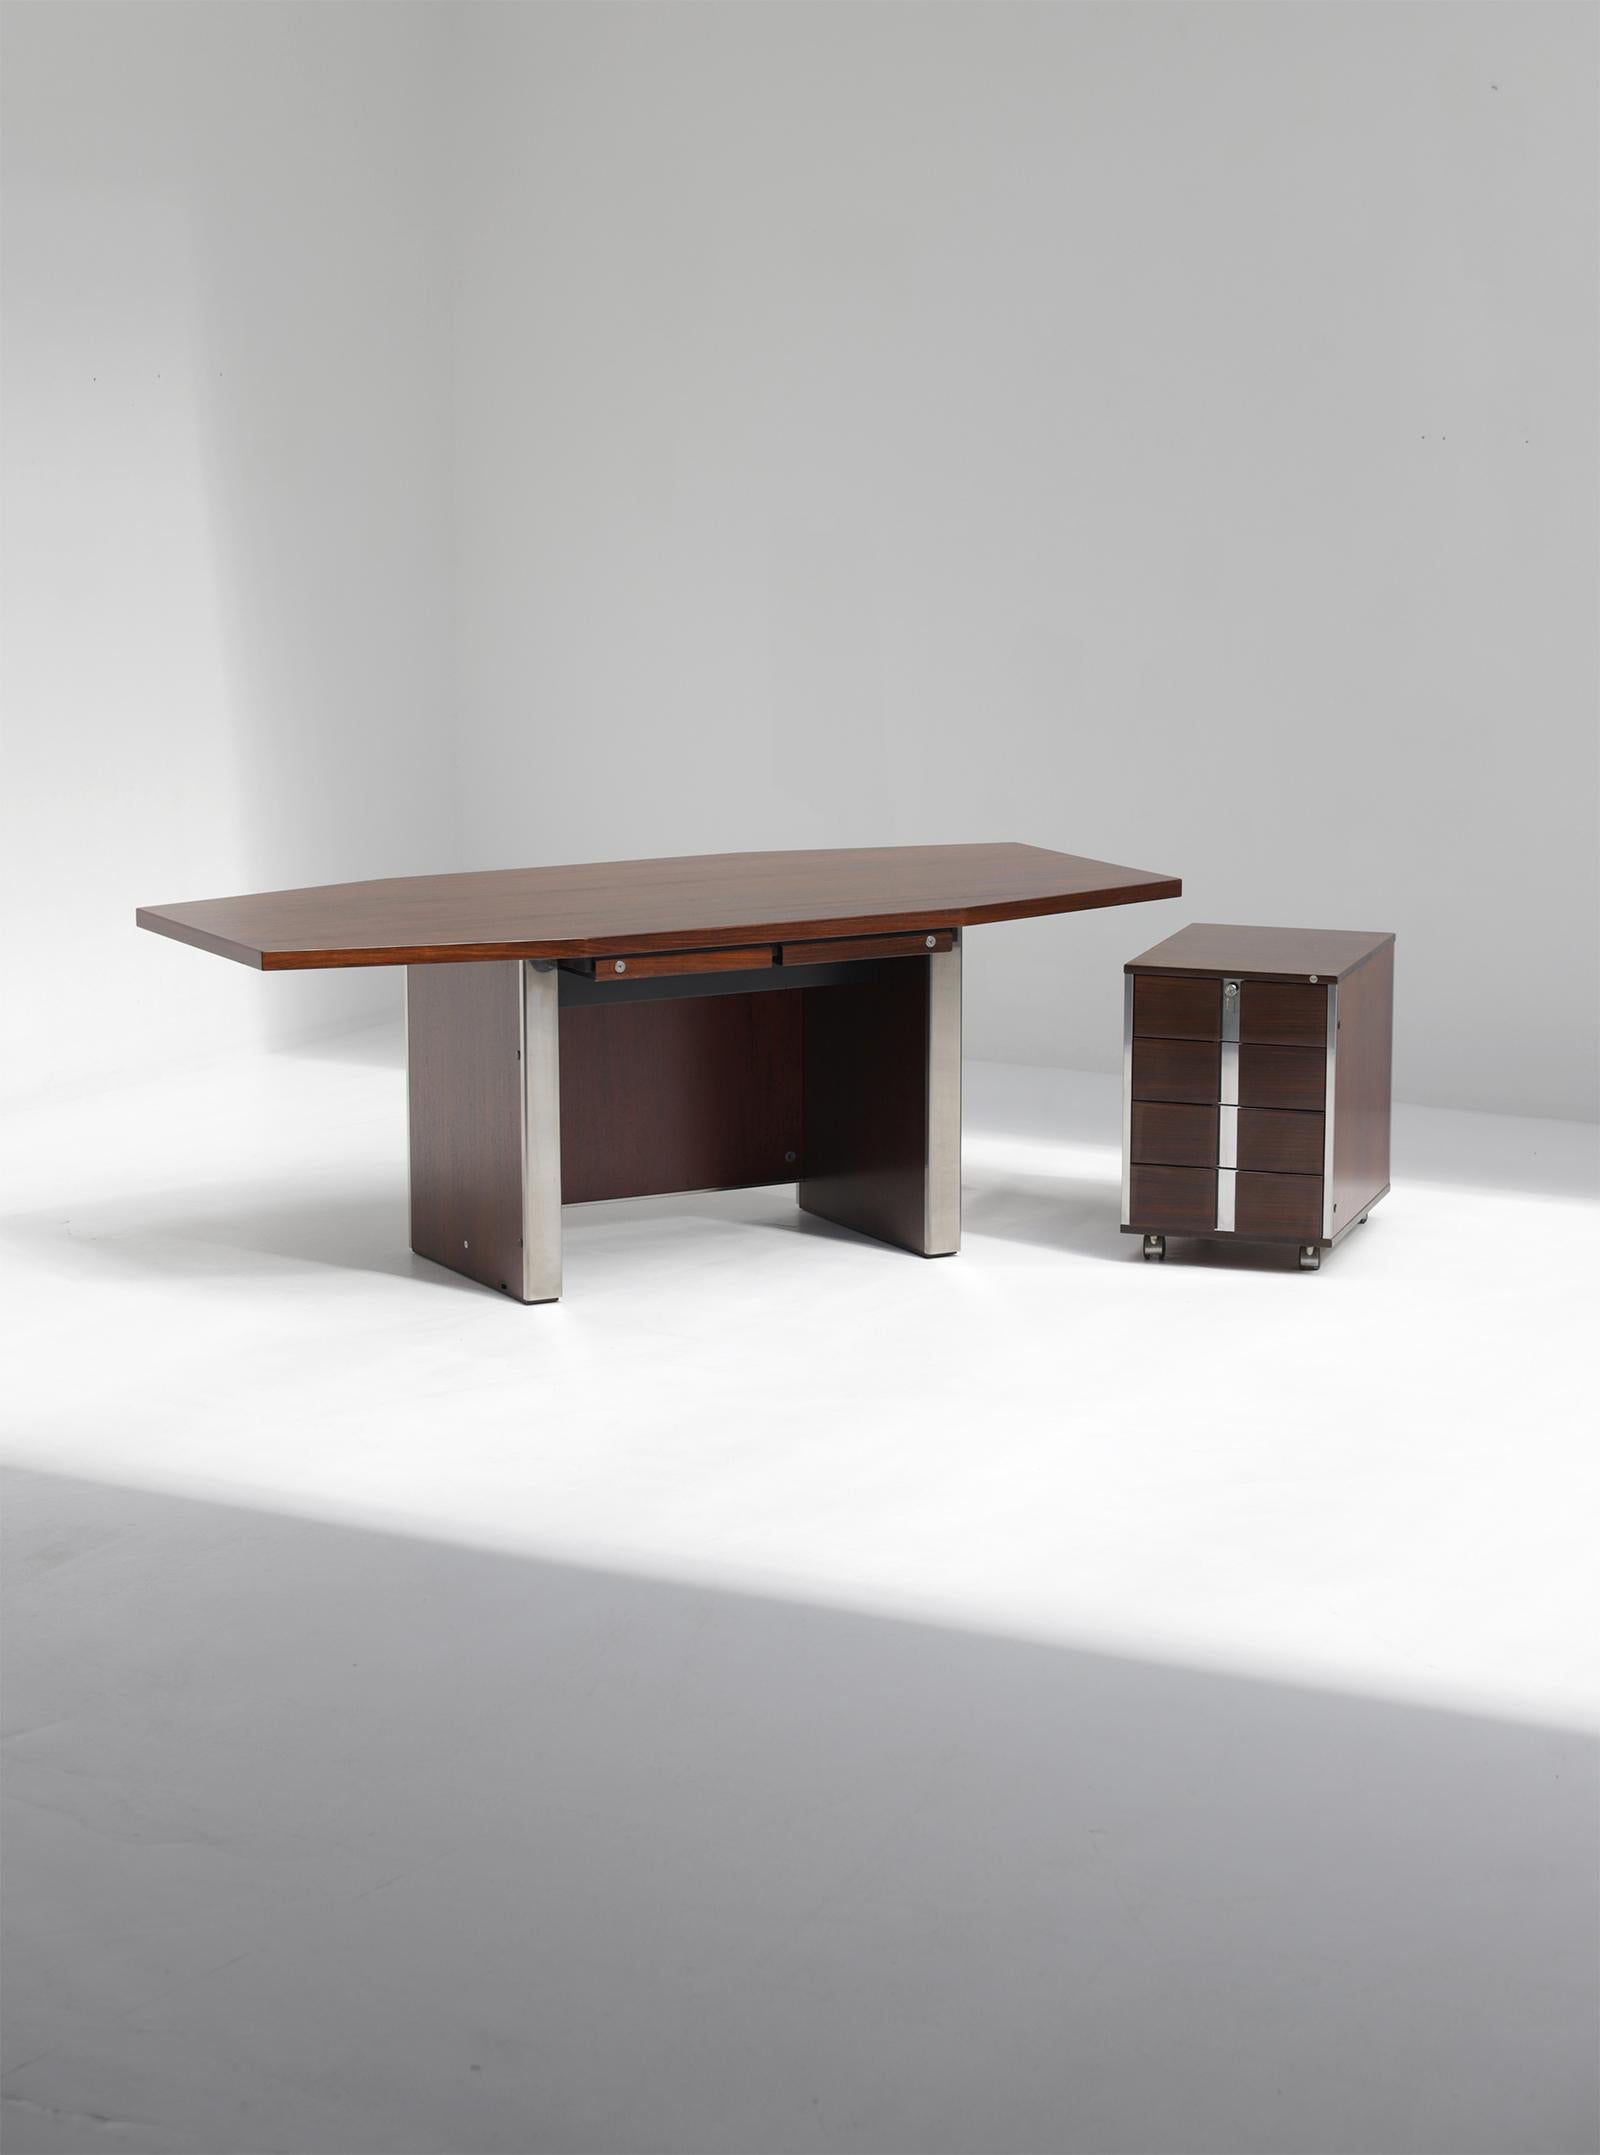 Mid-Century Modern desk by Desk Ennio Fazioli & Ufficio Tecnico for MIM, Italy 1960s. This desk is made of dark warm colored wood and has chrome detailed legs. Under the tabletop you can find 2 small drawers, which contain a stainless steel and